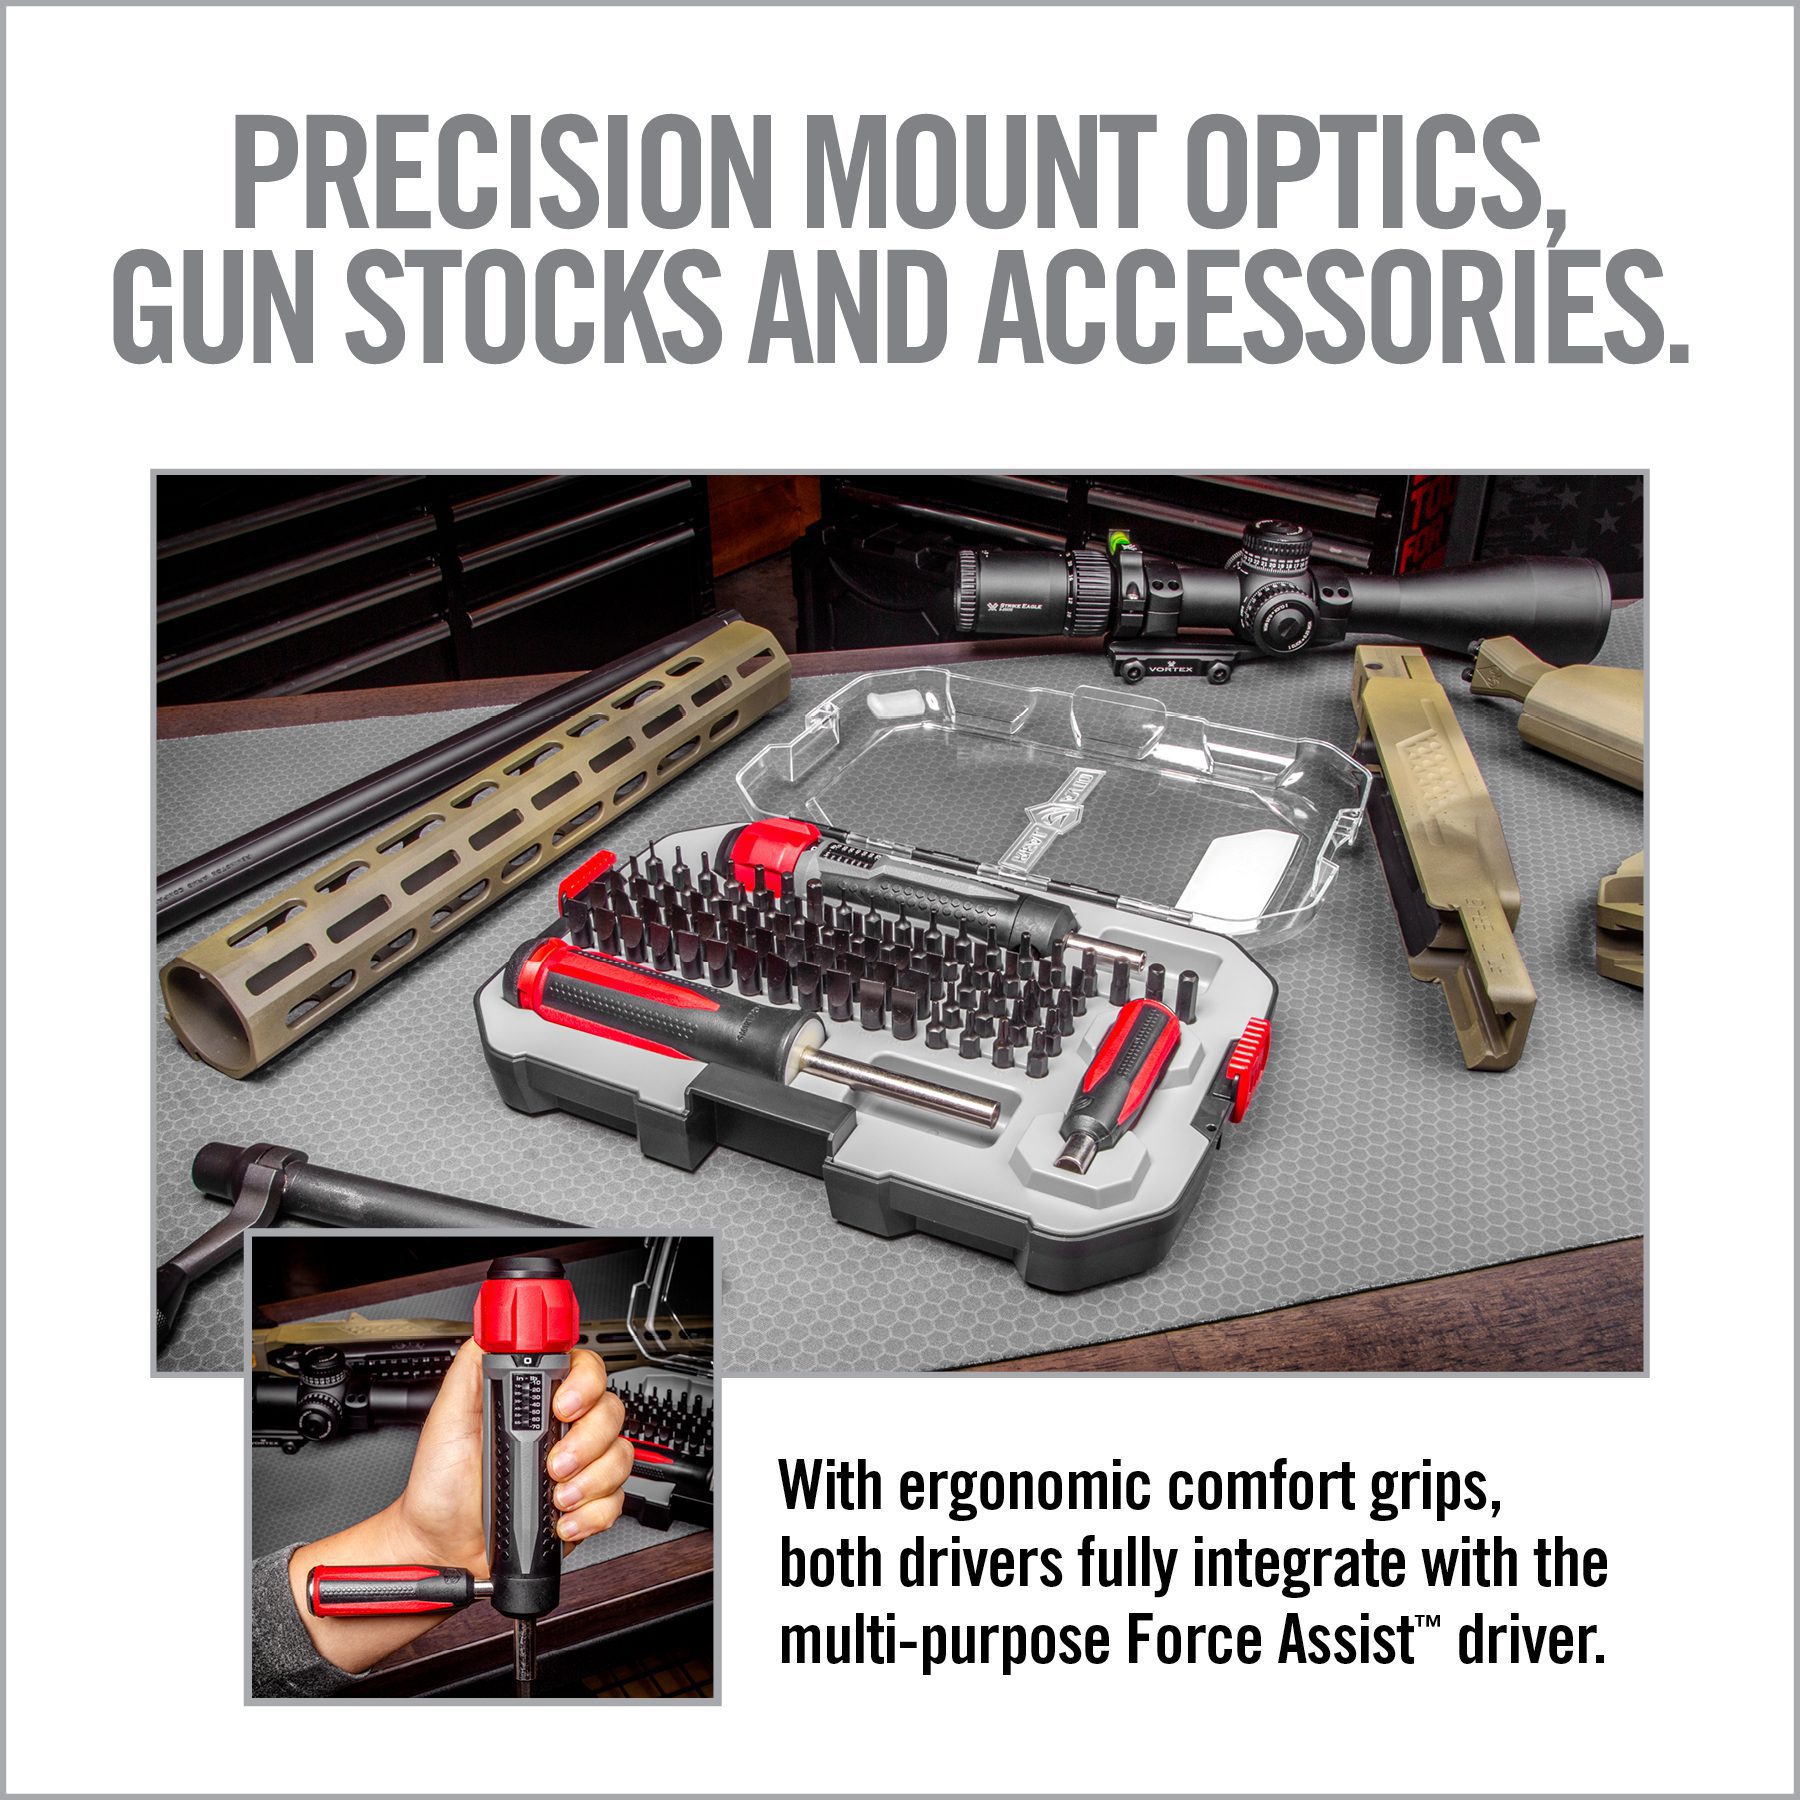 an advertisement for precision guns and accessories